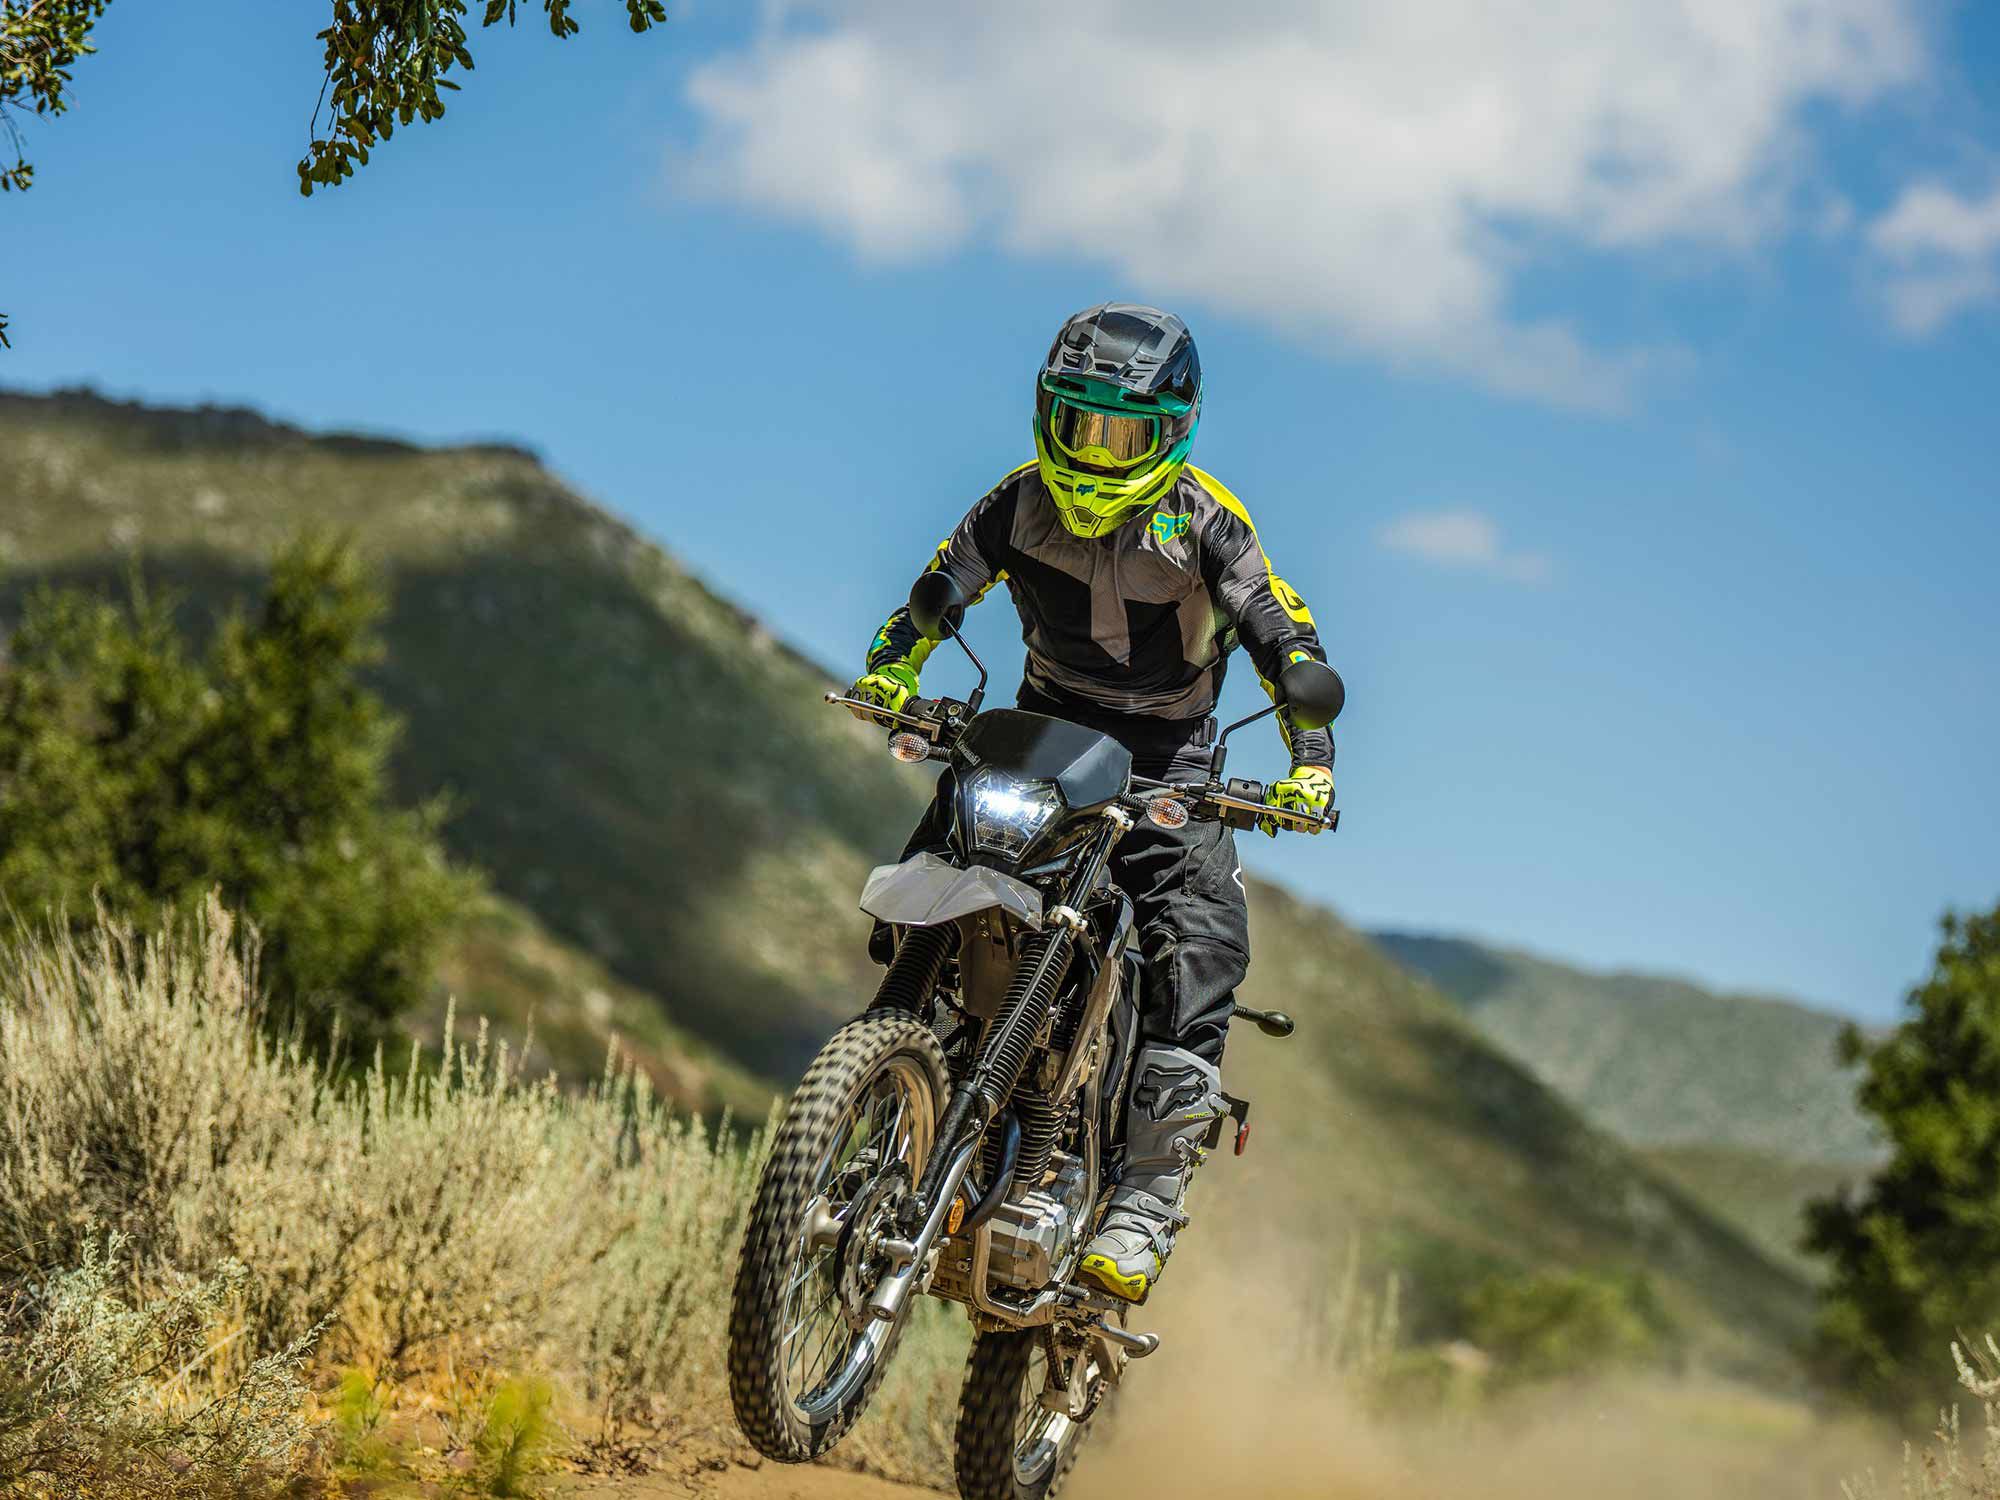 The KLX230 and its counterpart, the KLX230 S, see a handful of updates for the 2023 model year.